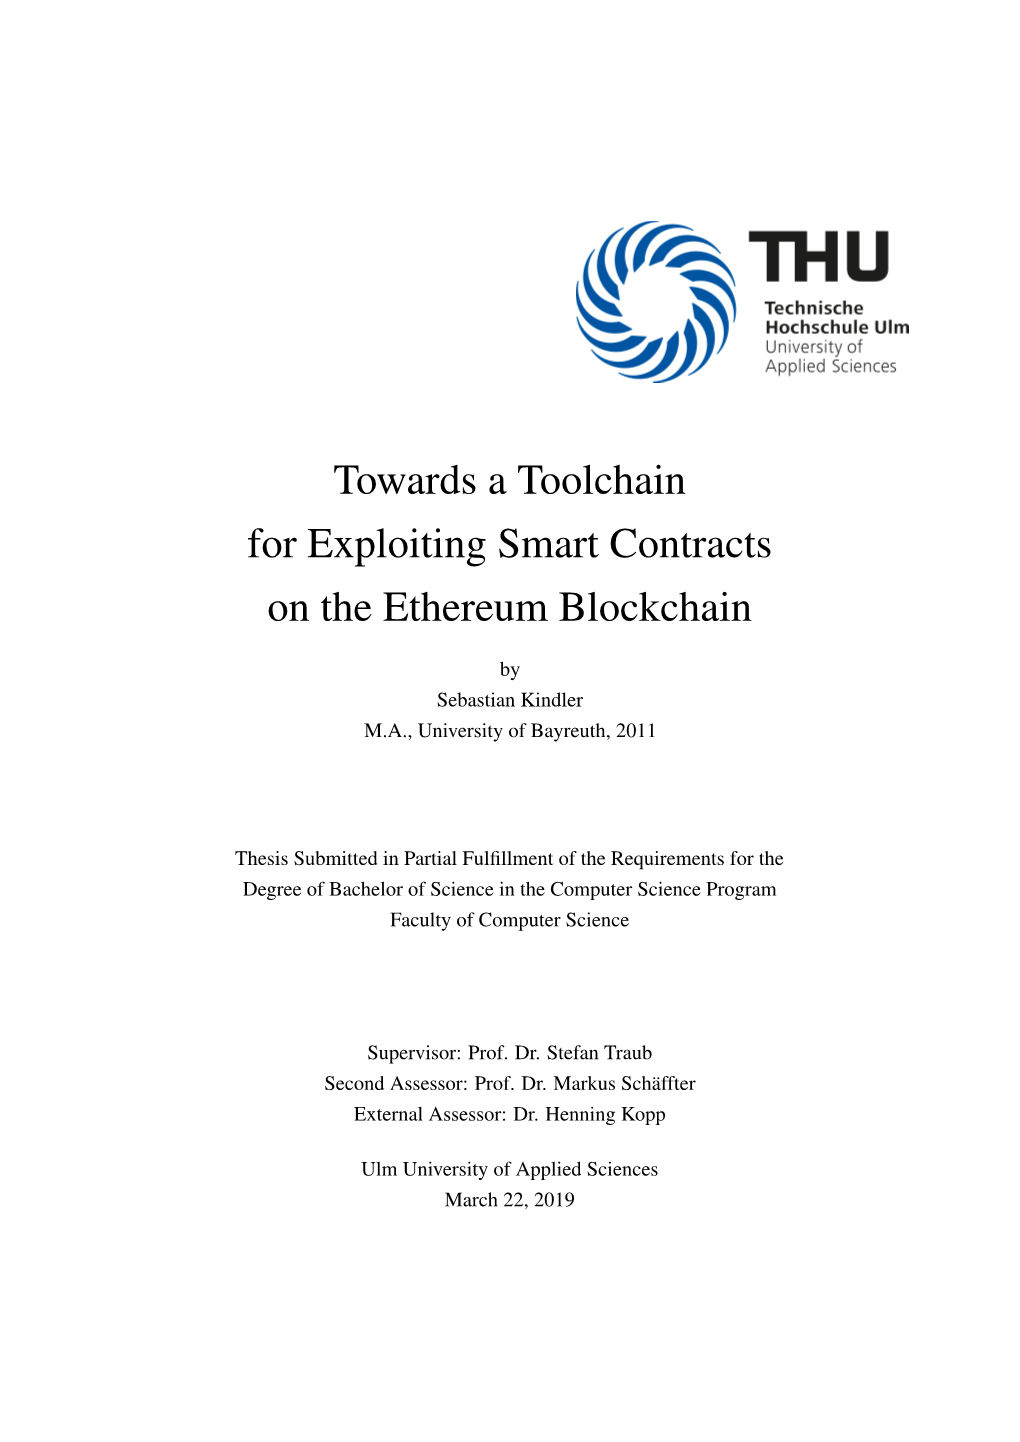 Towards a Toolchain for Exploiting Smart Contracts on the Ethereum Blockchain